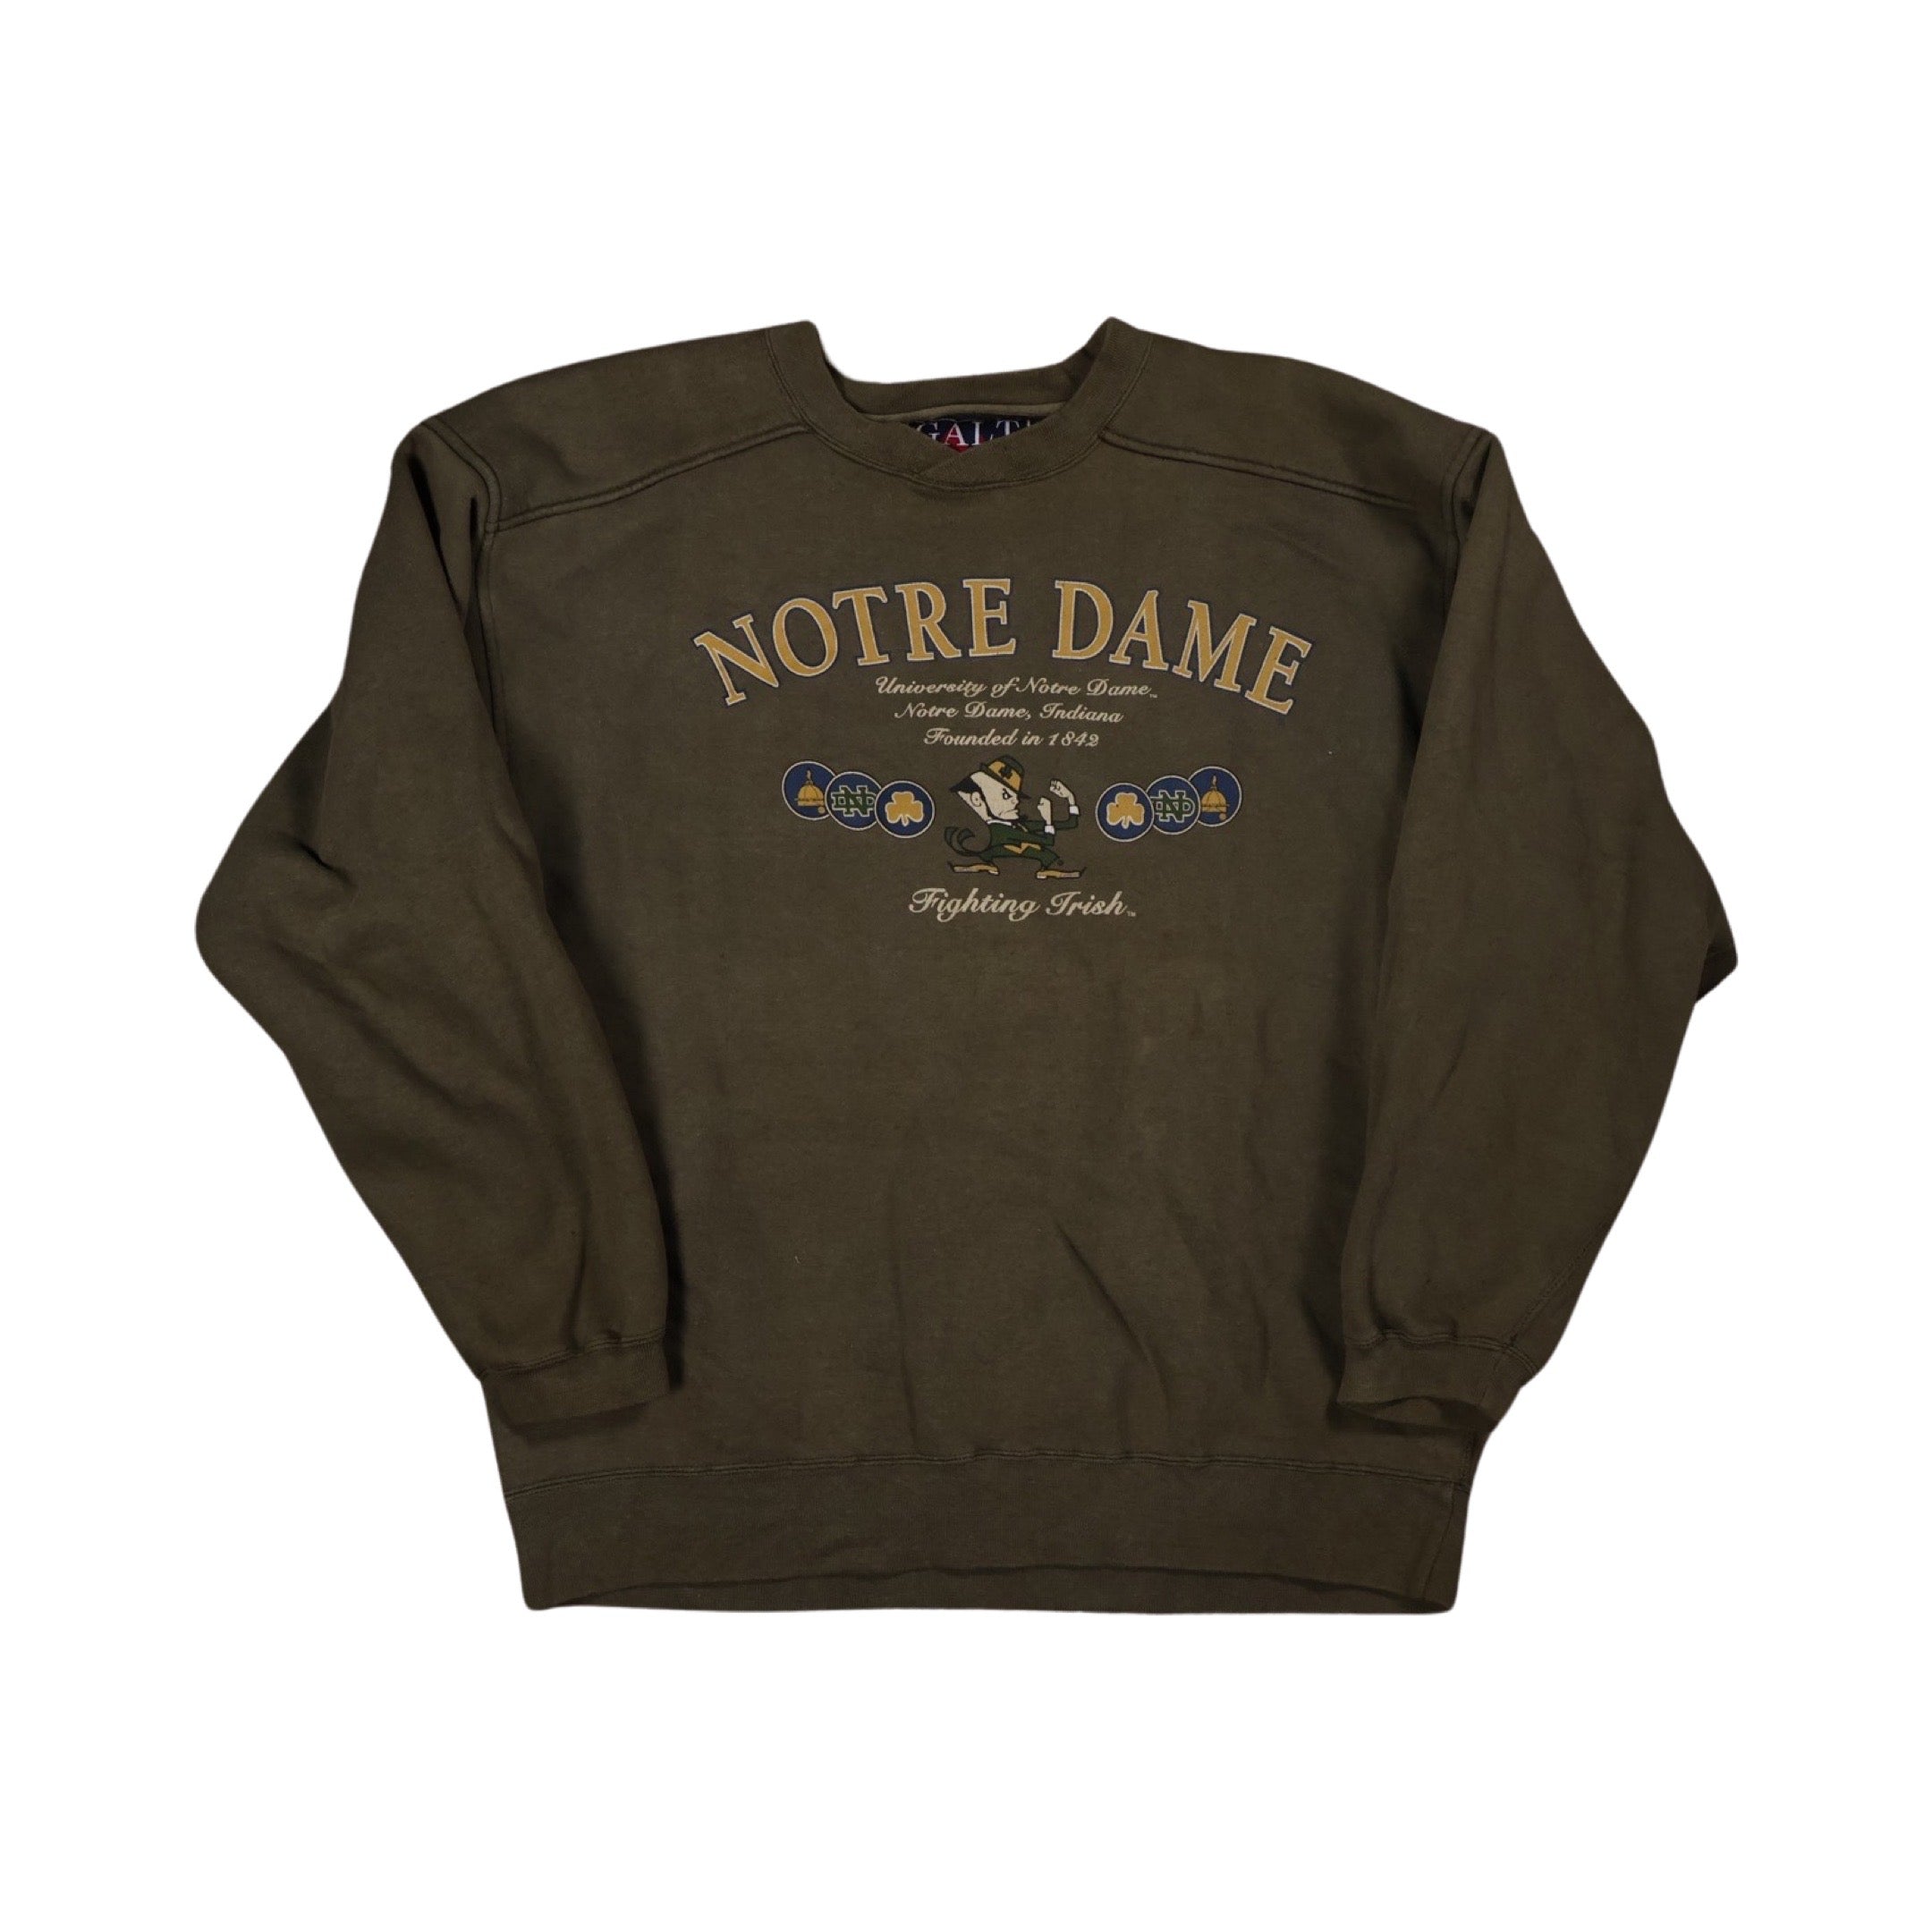 Notre Dame 90s Sweater (Large)